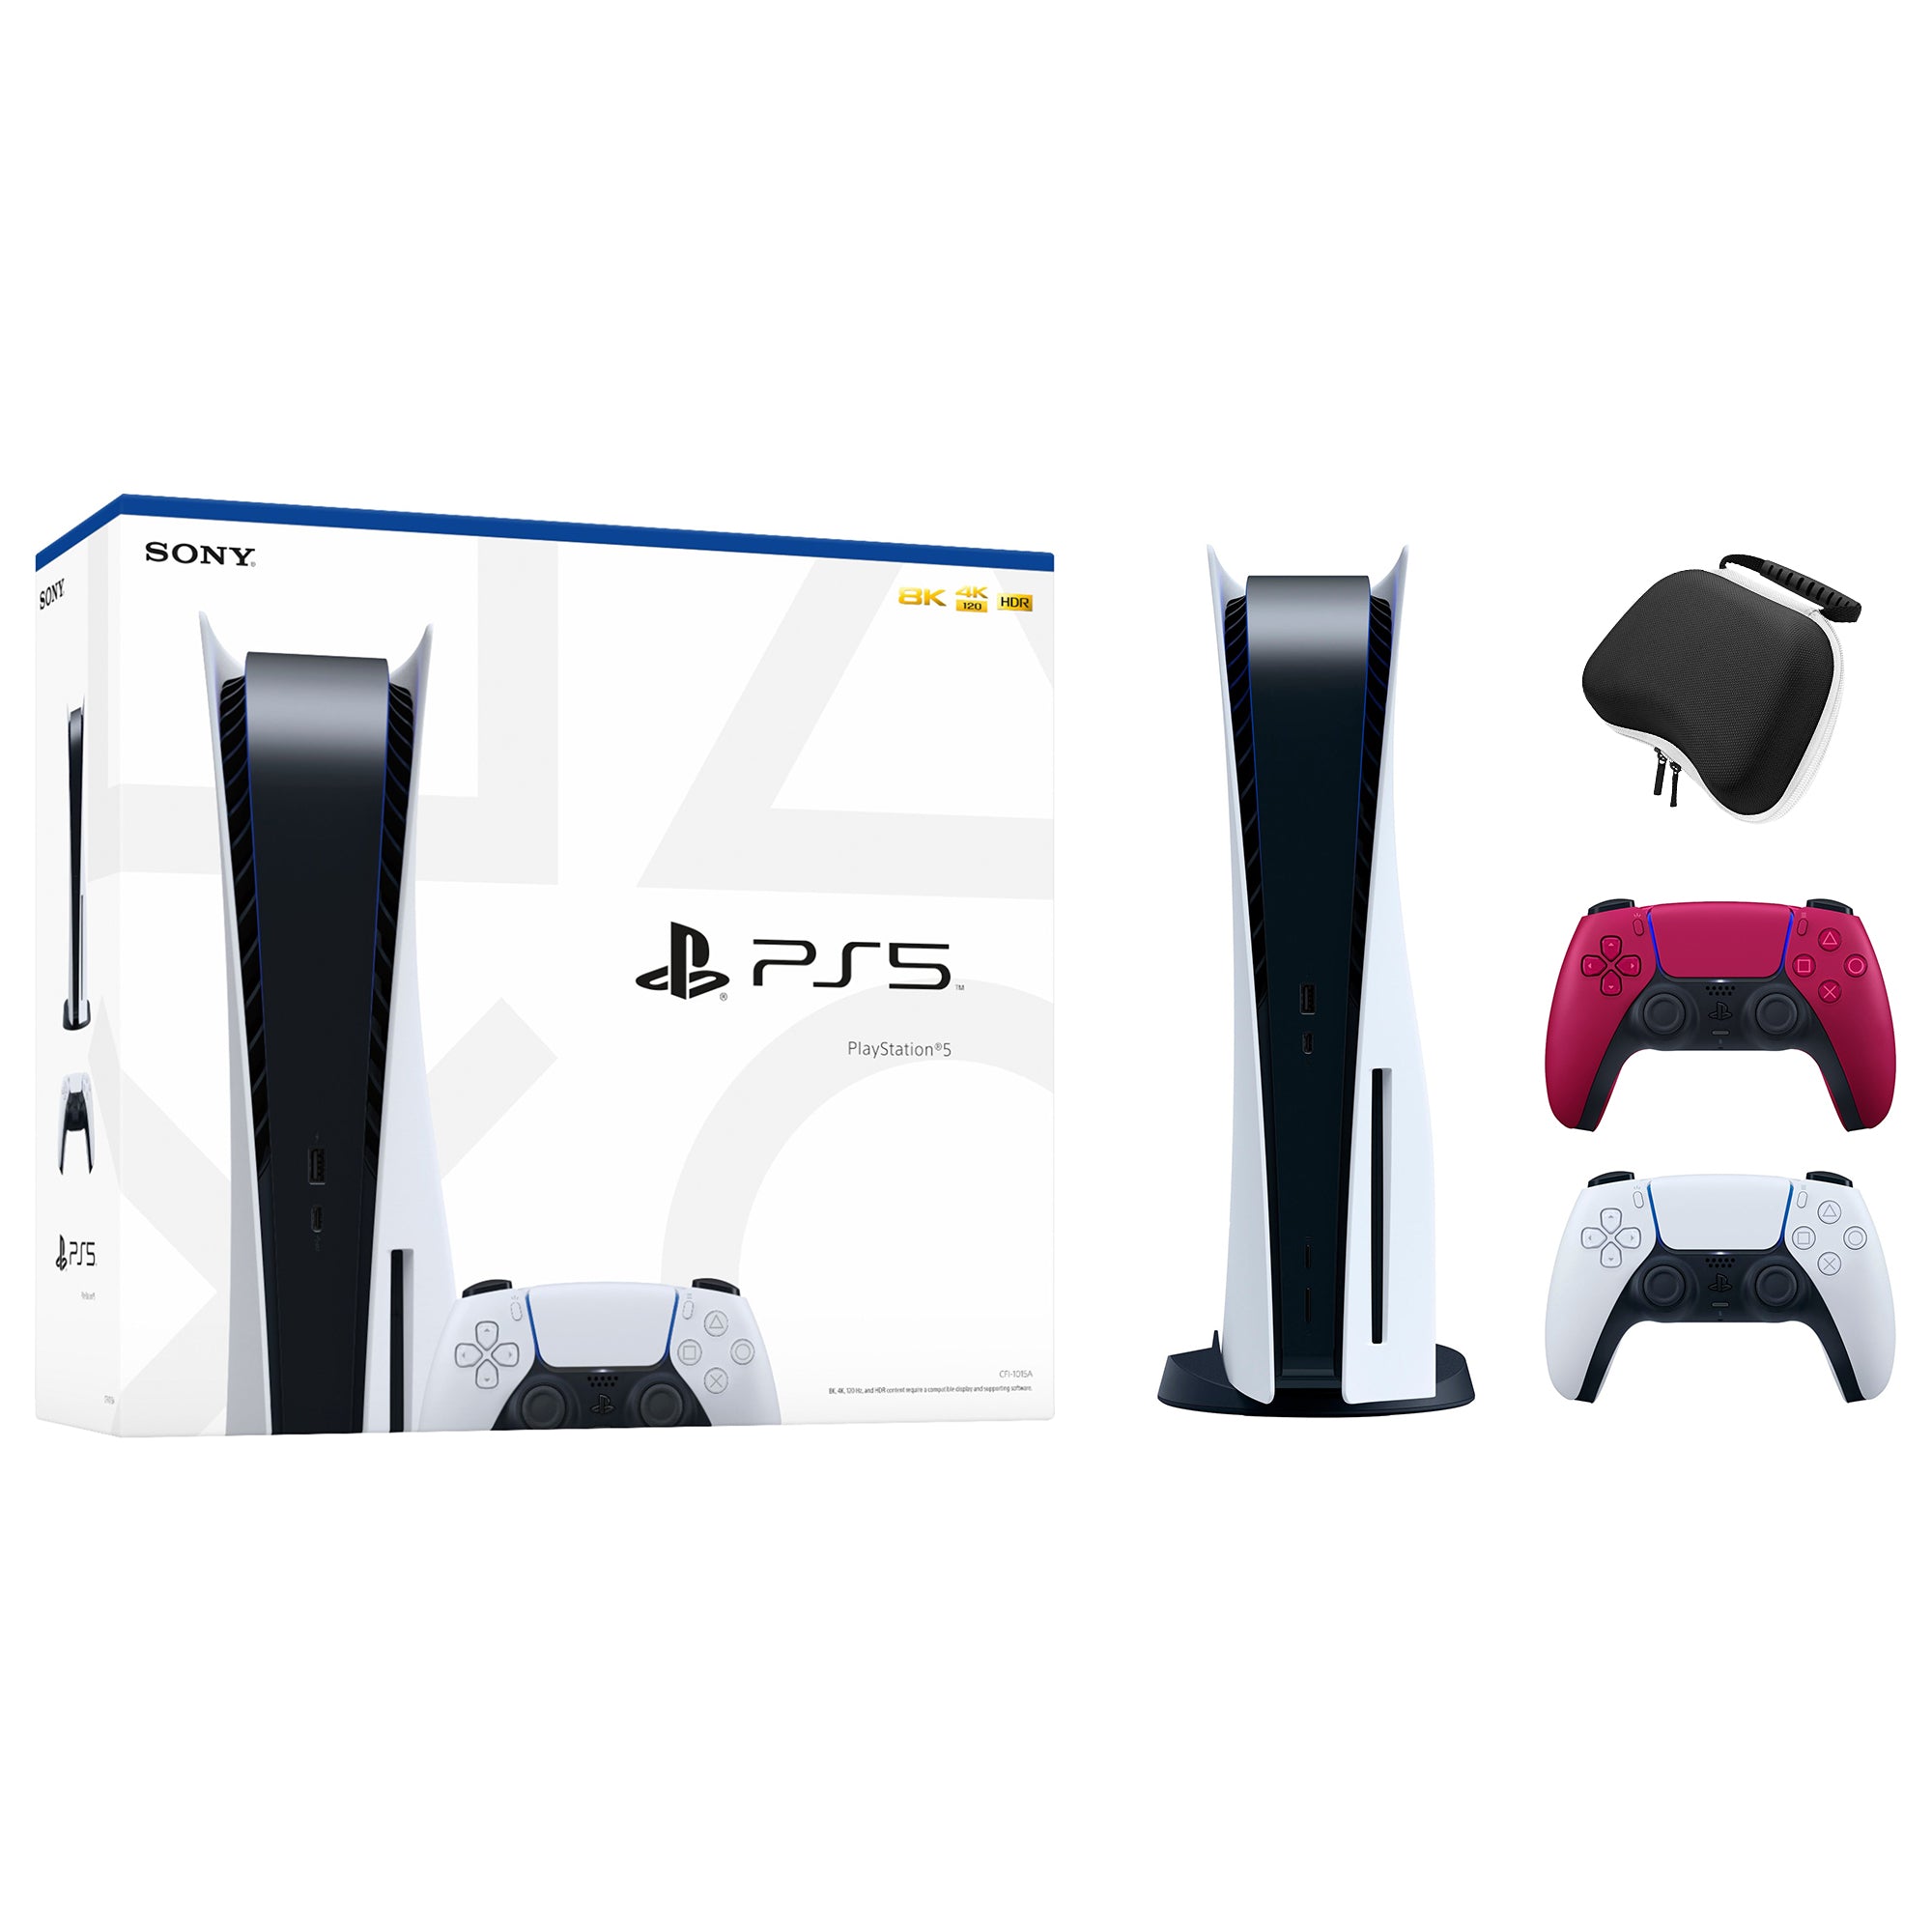 PlayStation 5 Disc Edition with Two Controllers White and Cosmic Red DualSense and Mytrix Hard Shell Protective Controller Case - PS5 Gaming Console